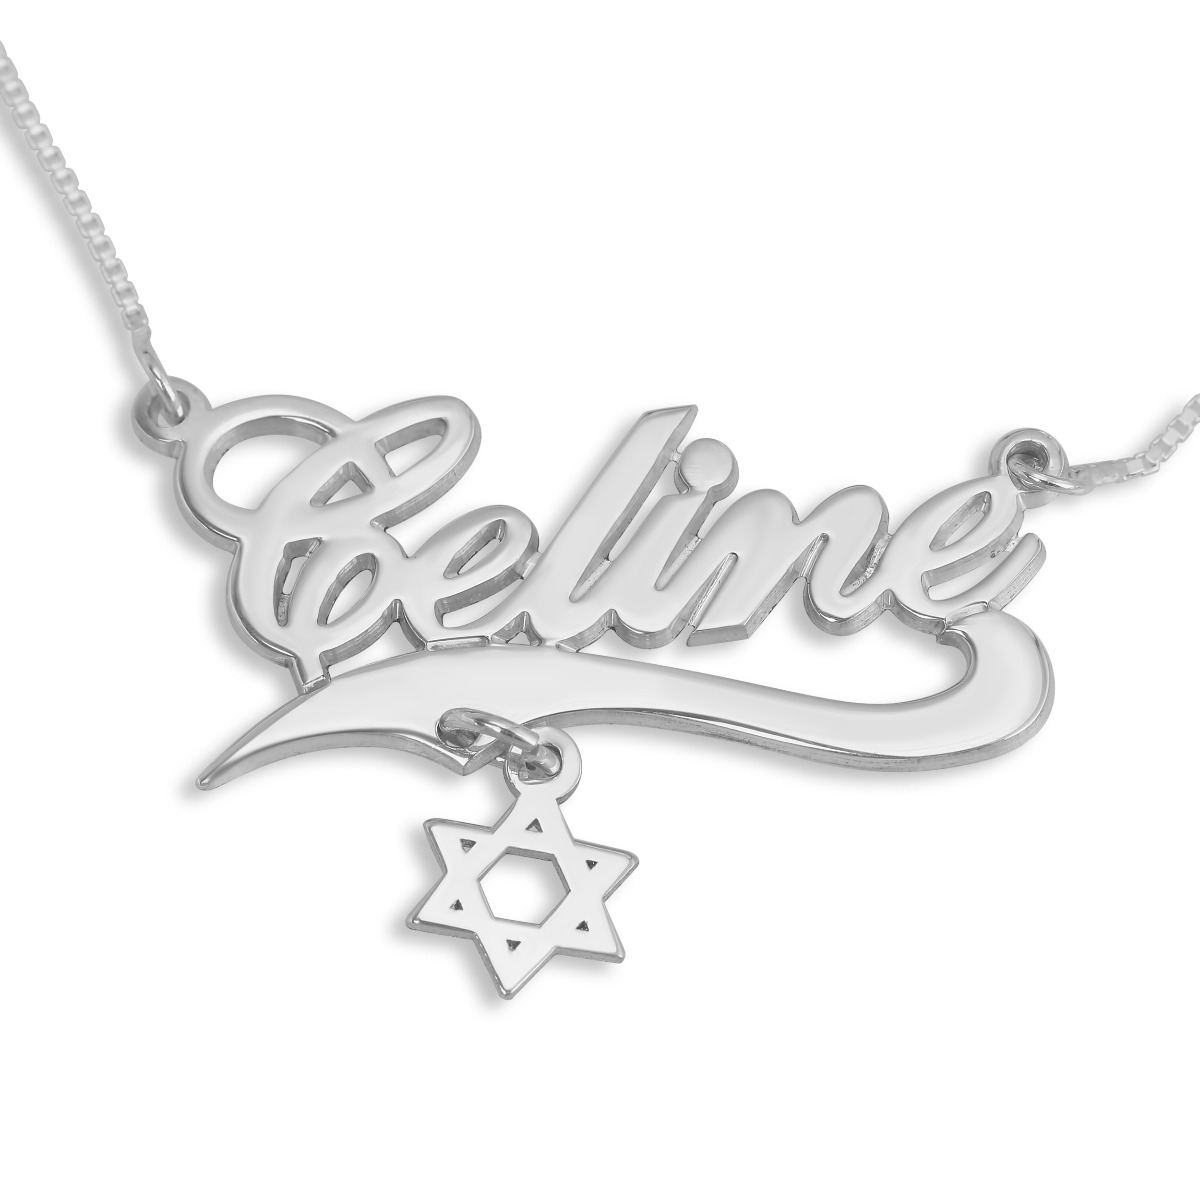 Sterling Silver Customizable Name Necklace with Star of David Charm - 1